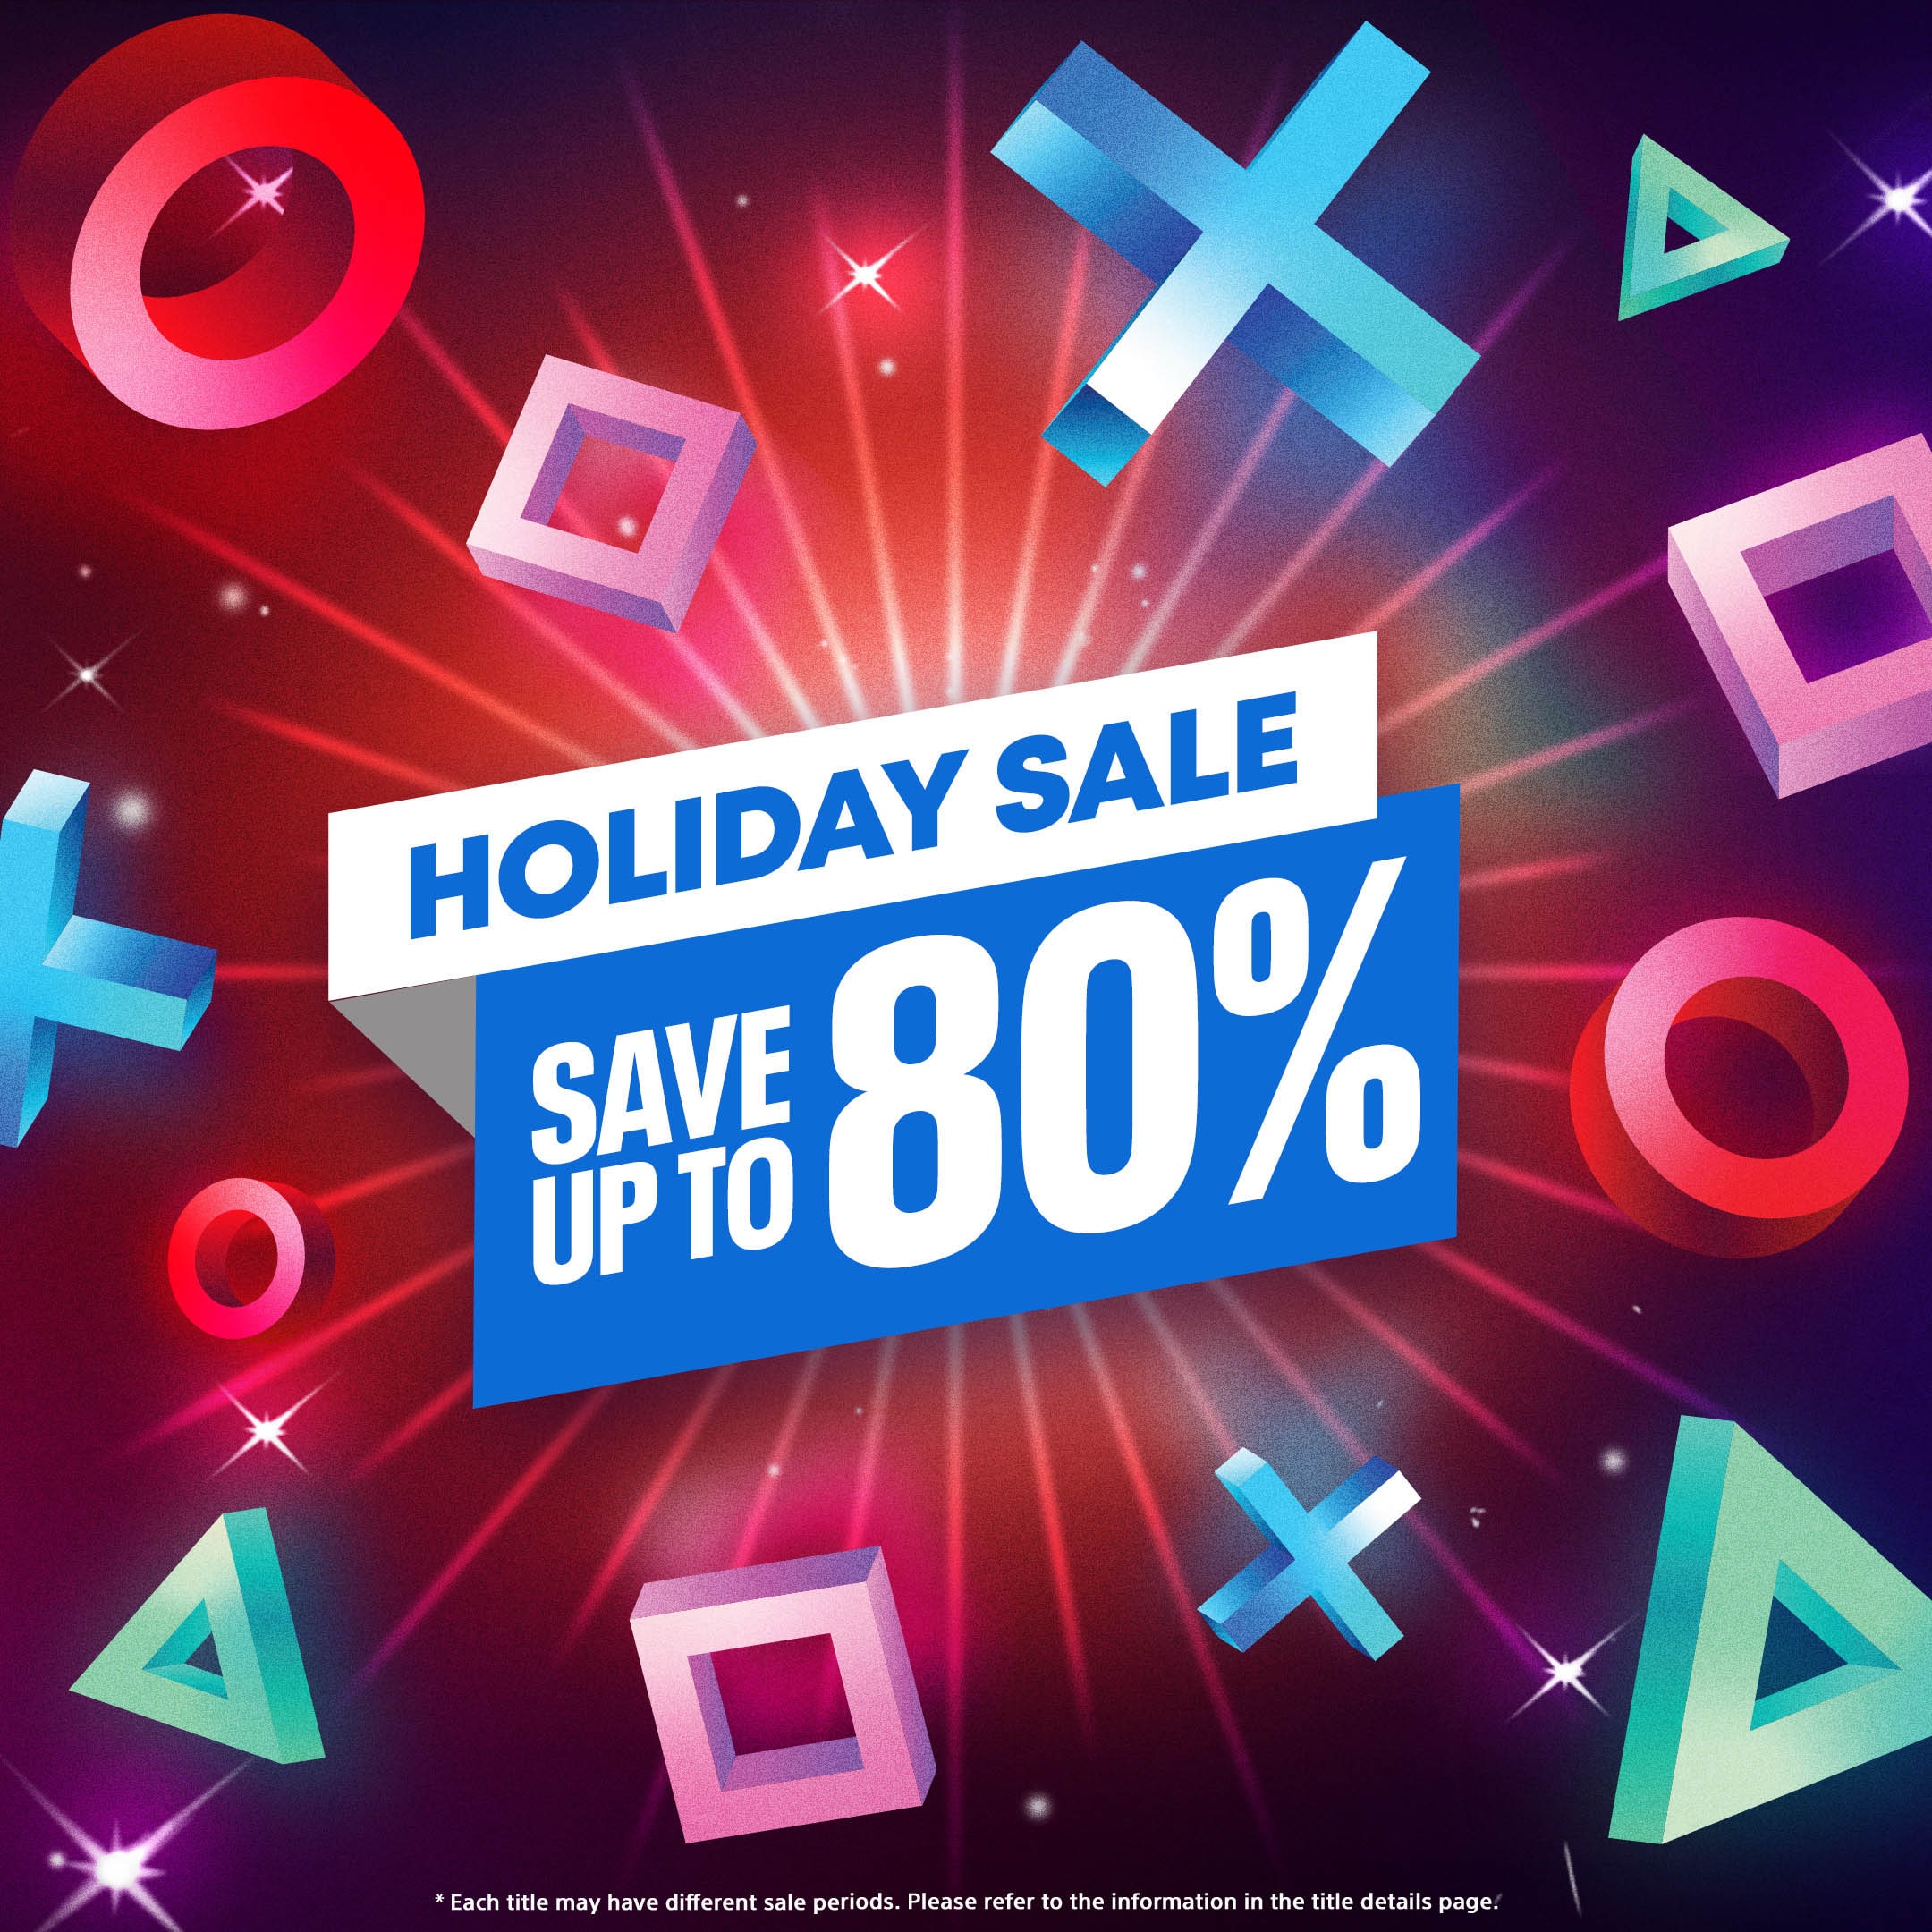 playstation store holiday sale